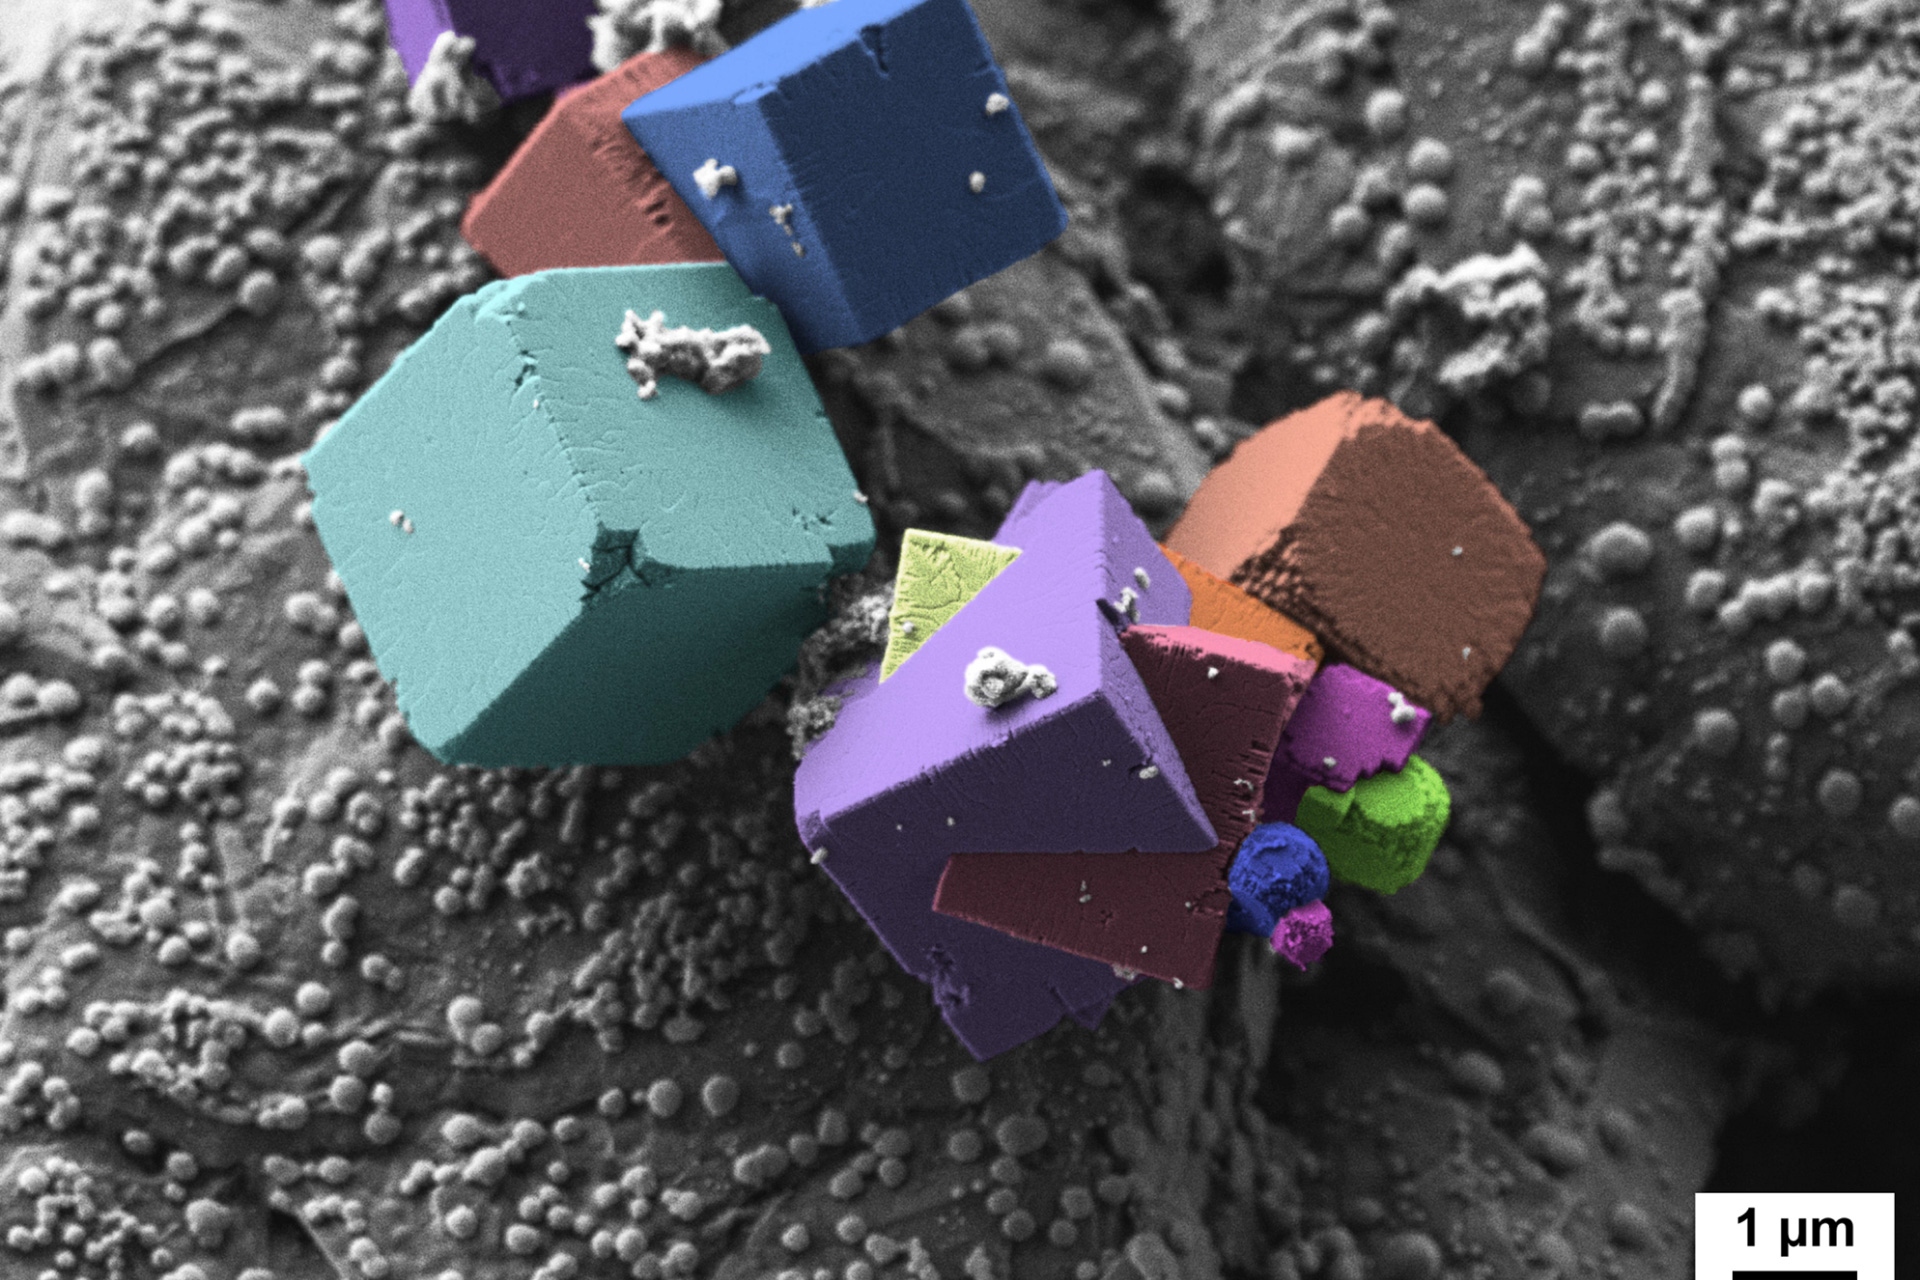 2nd place: Fluorides on an anode surface of a Li-ion battery, acquired with a ZEISS Crossbeam 550 focused ion beam scanning electron microscope